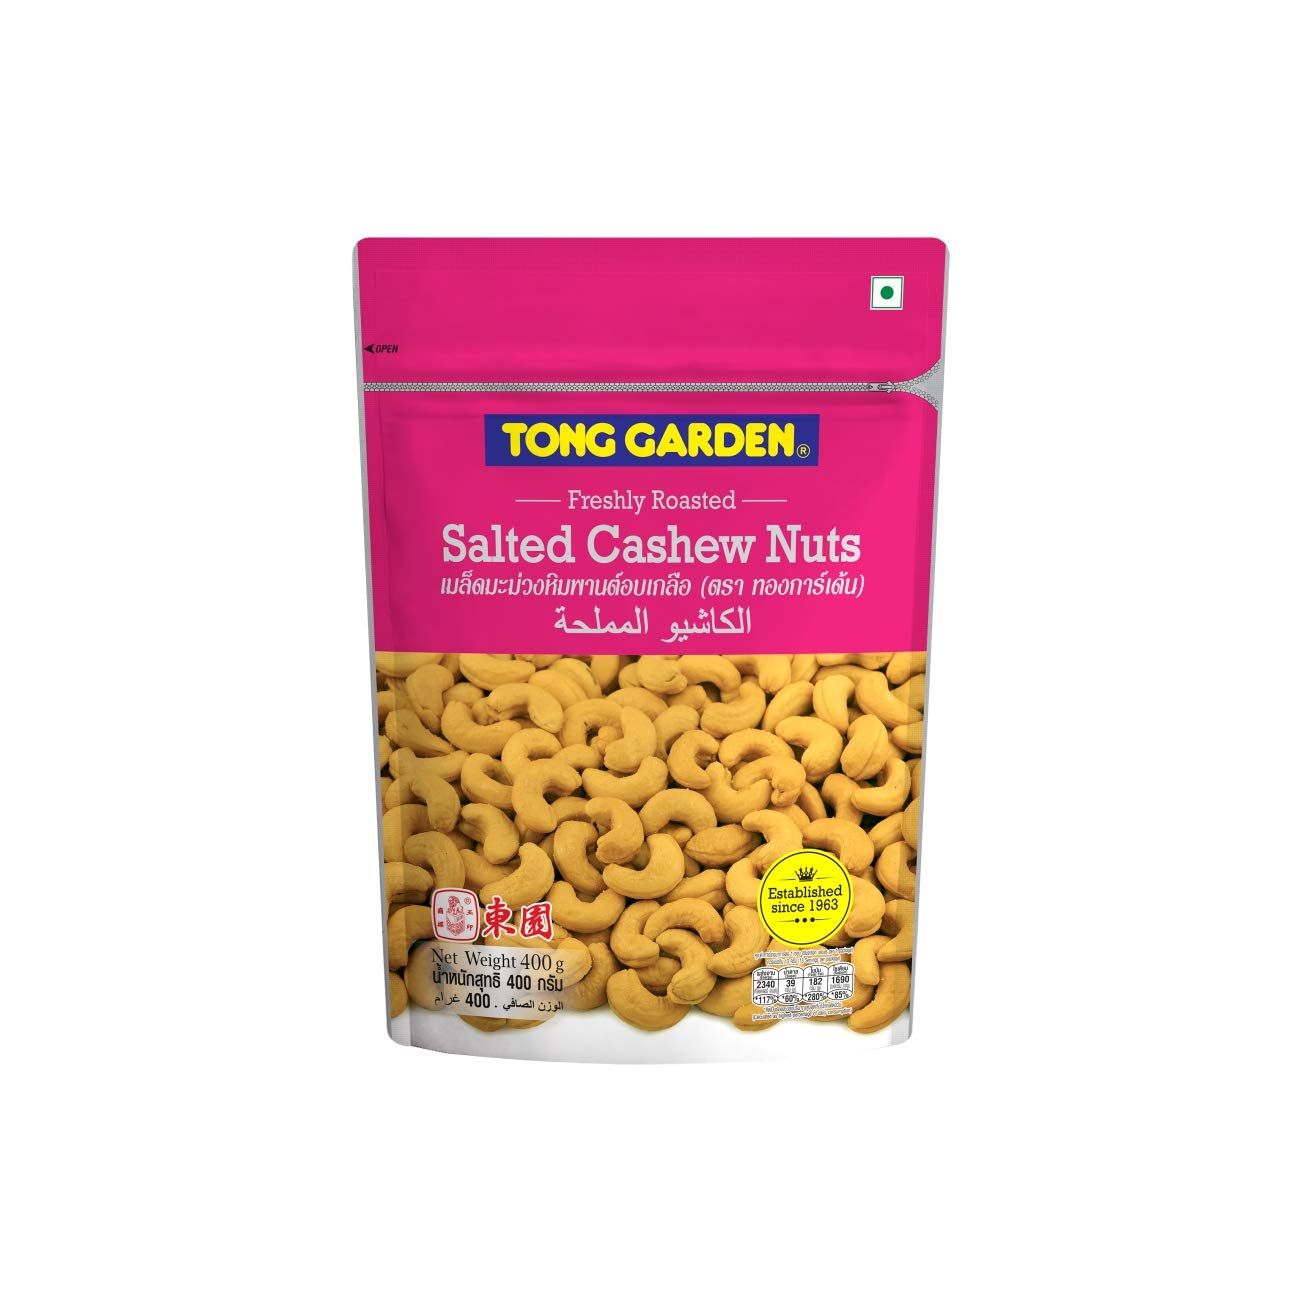 Tong Garden Salted Cashew Nuts Image